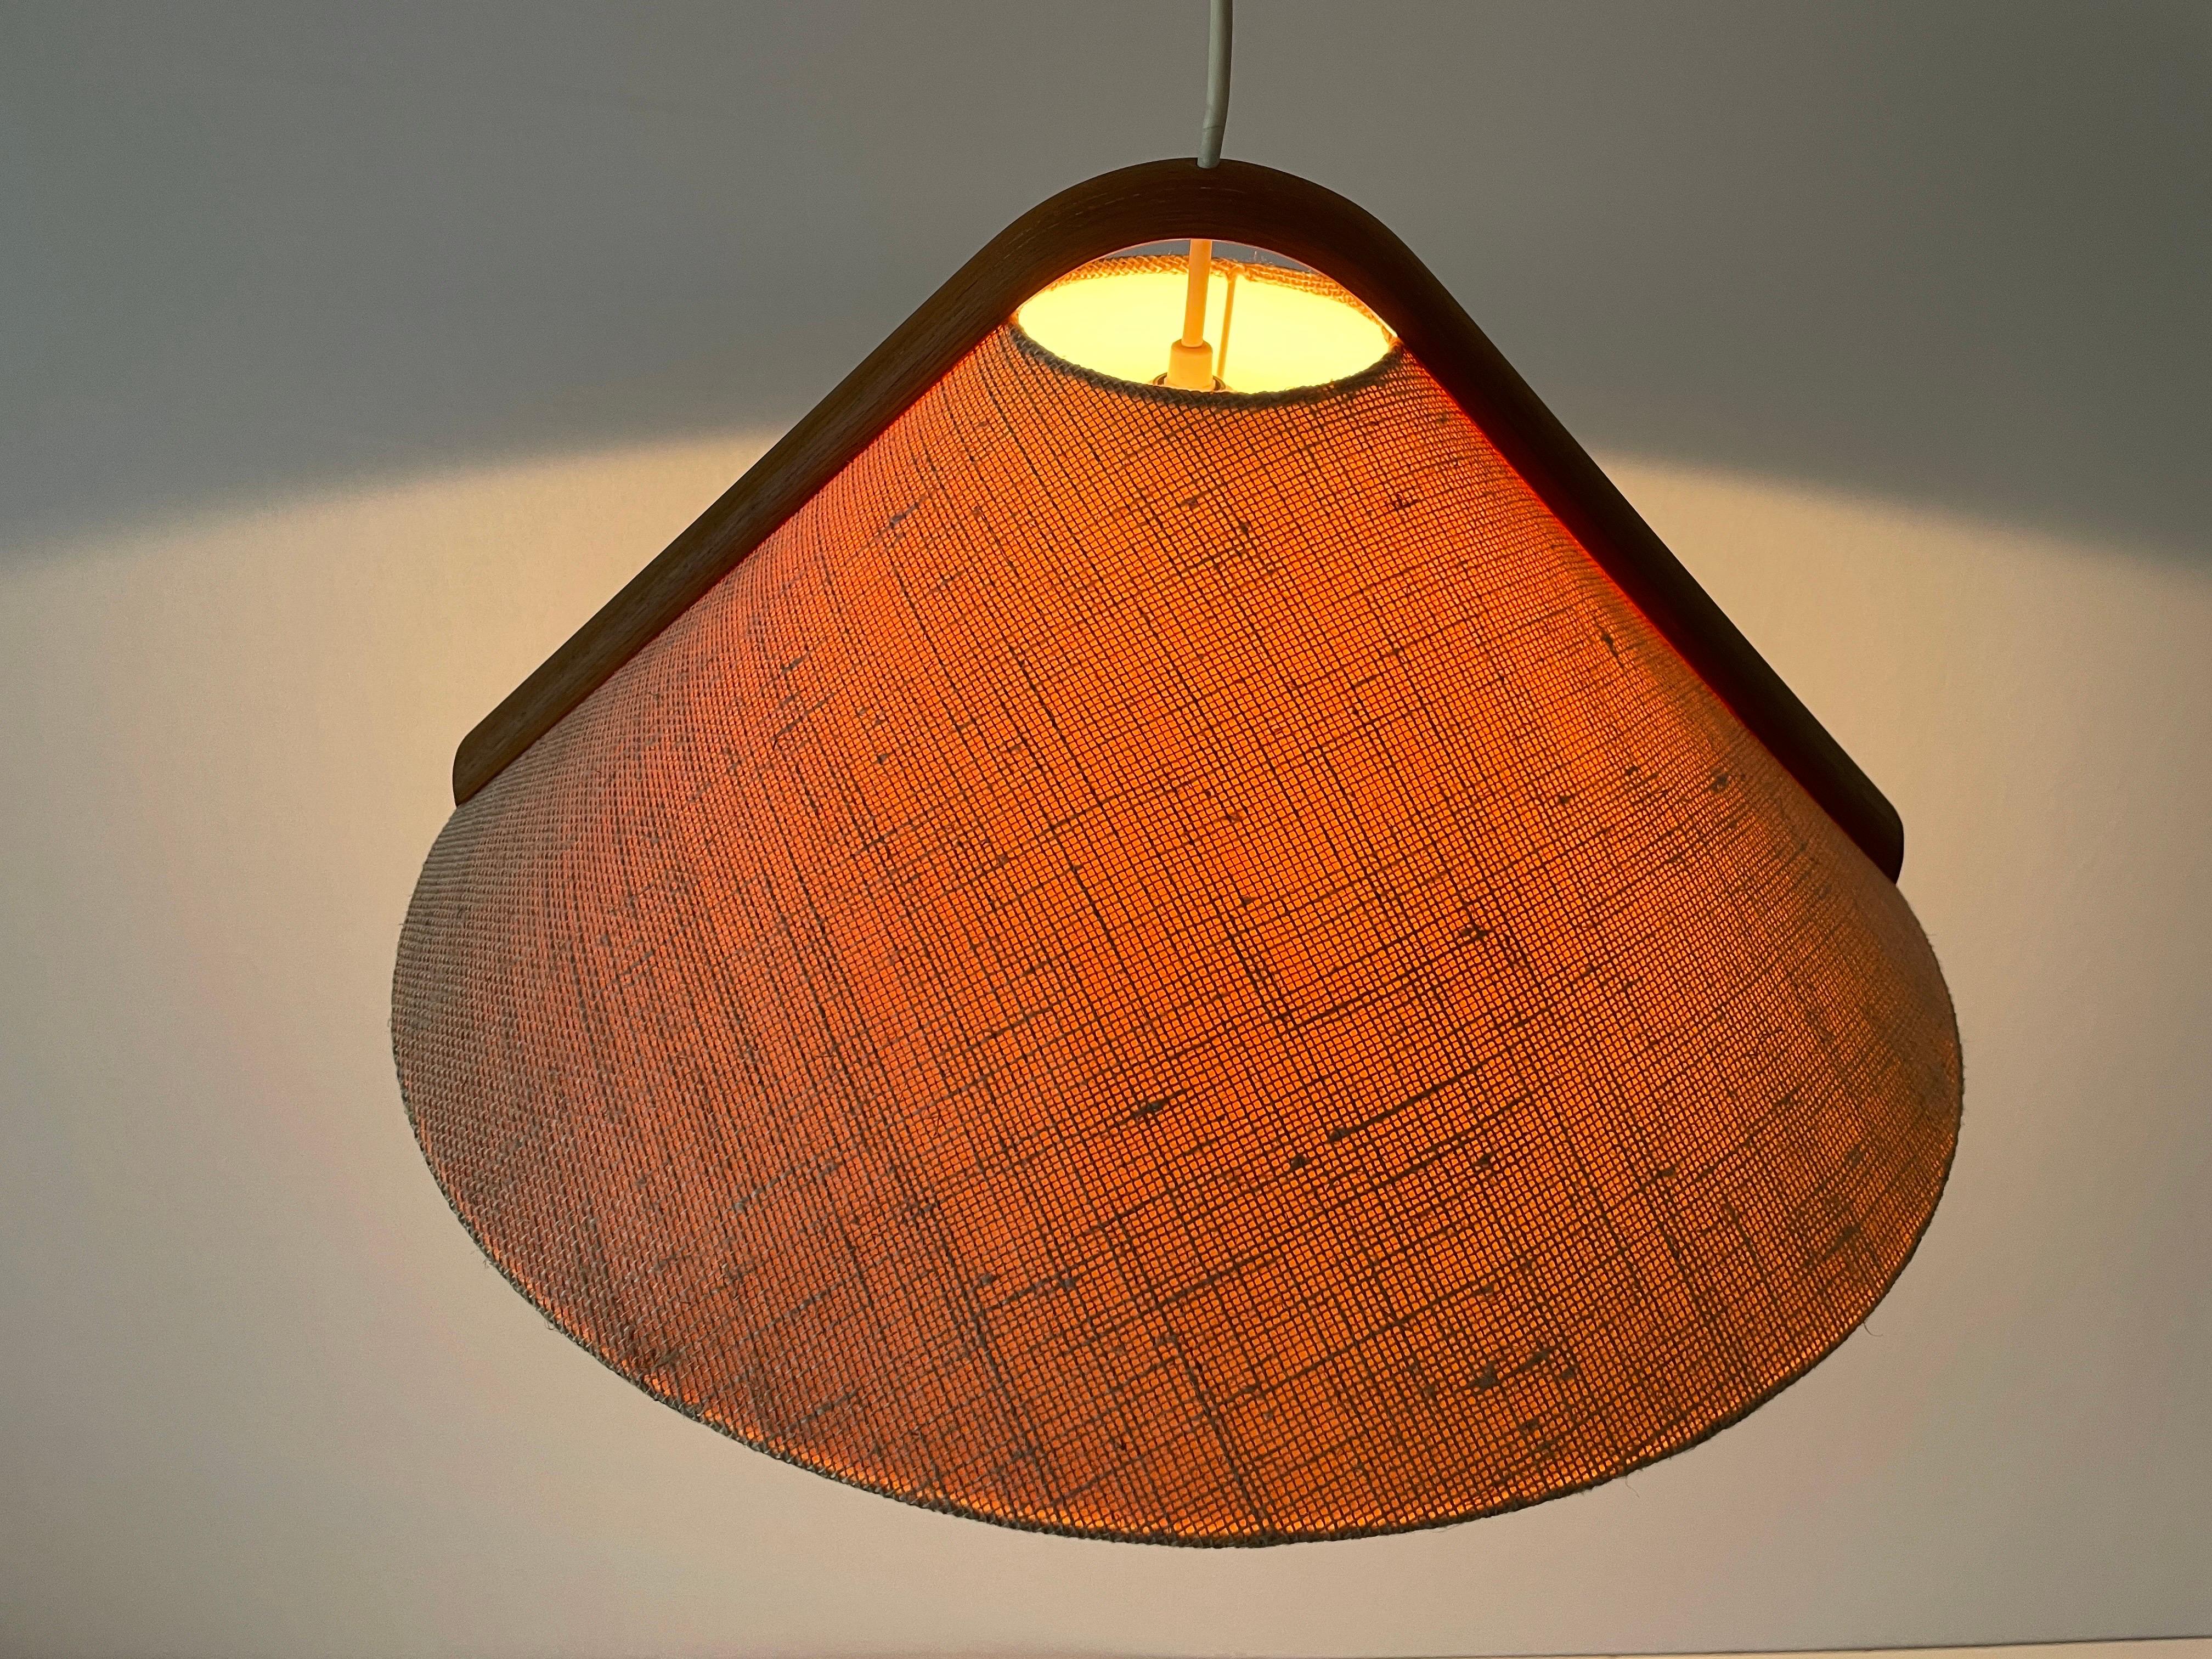 Conic Design Fabric Pendant Lamp with Teak Detail, 1960s, Germany For Sale 6